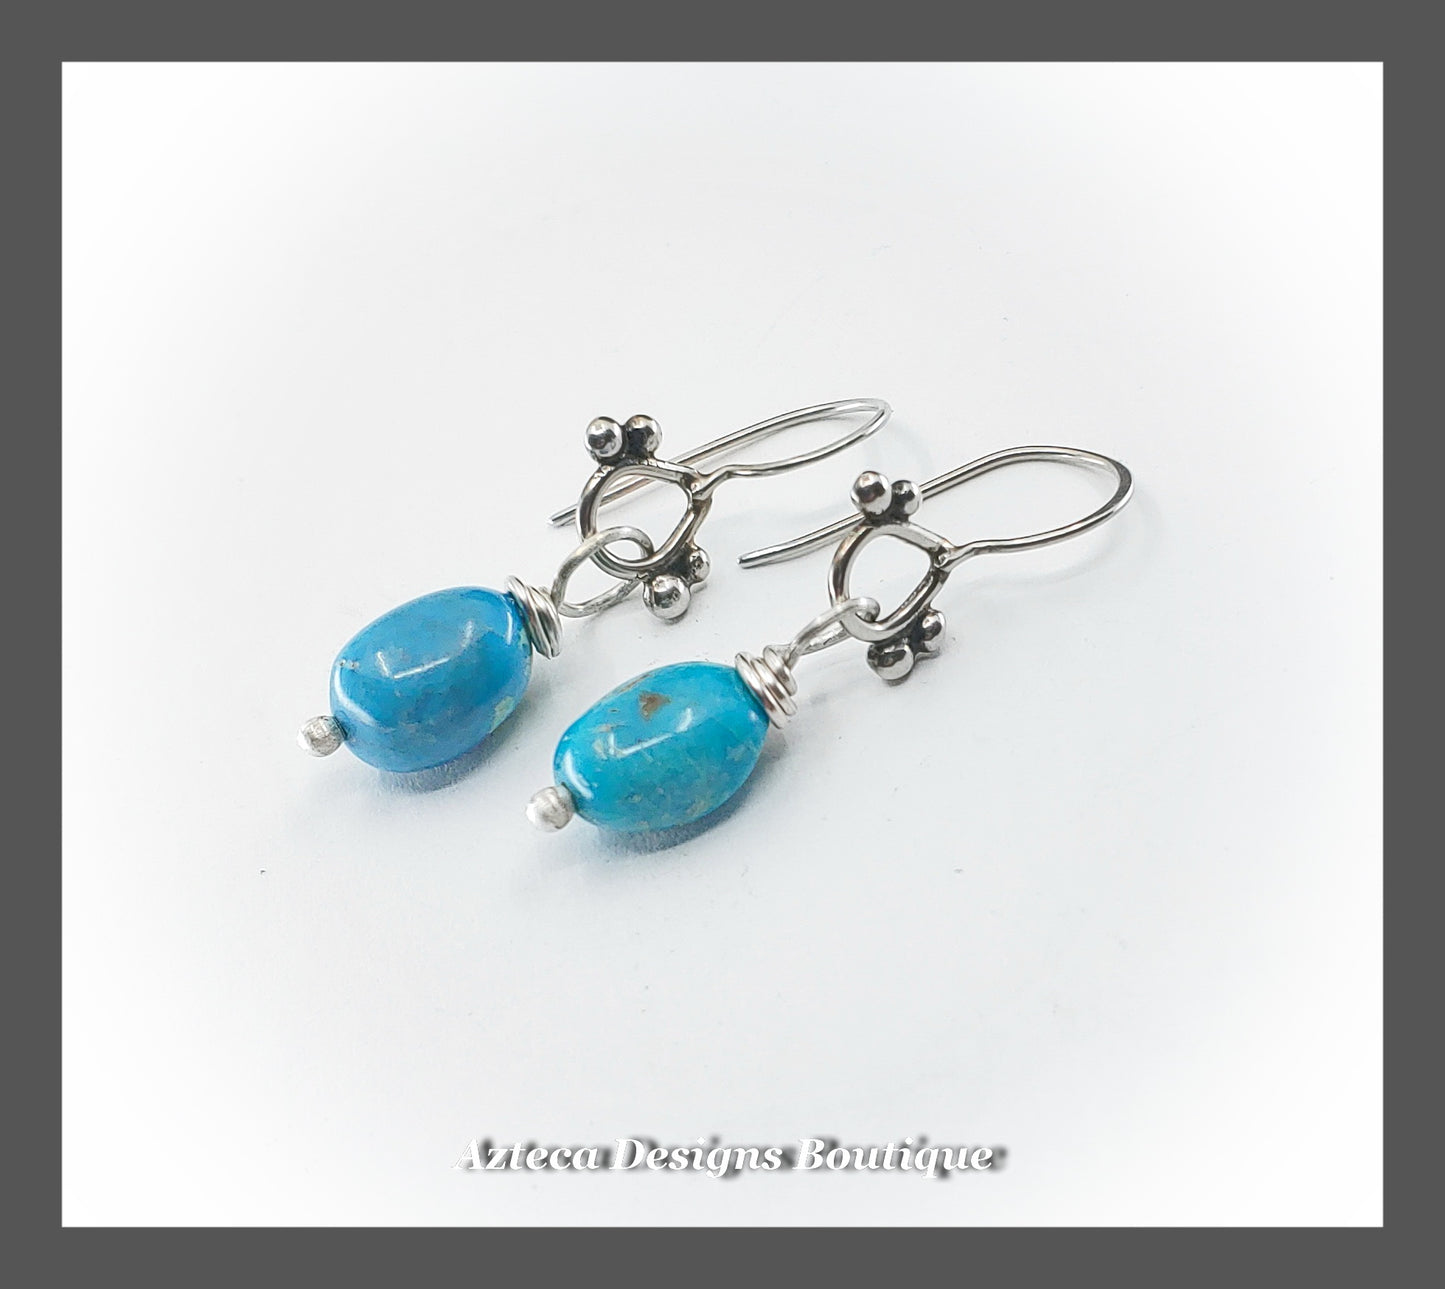 Blue Campitos Turquoise Nugget + Hand Fabricated Argentium Silver Earrings